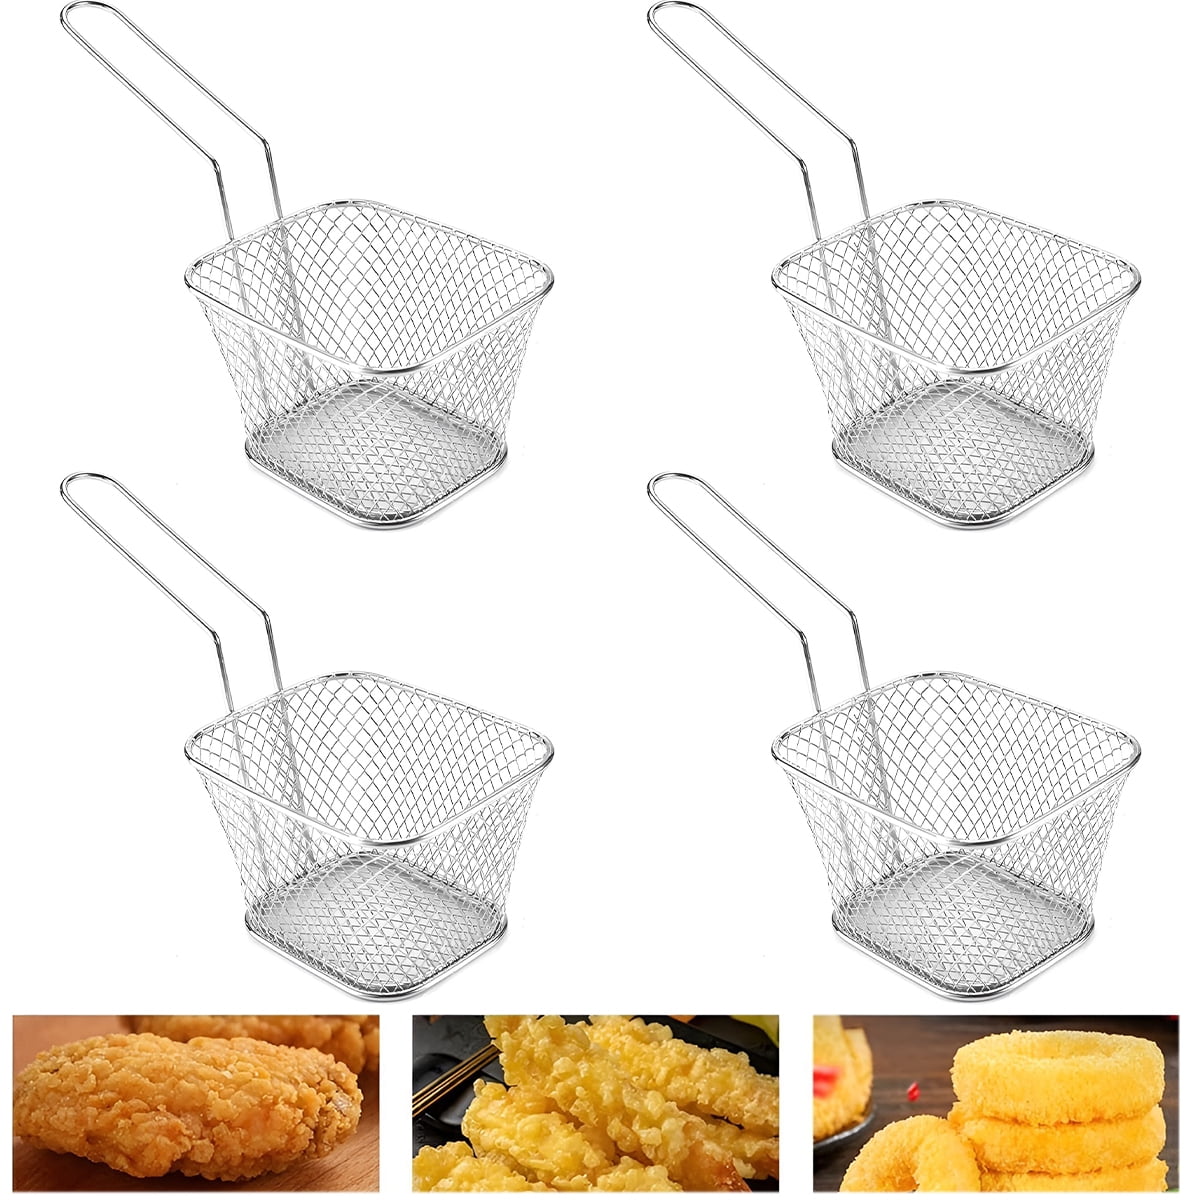 Square Silver Stainless Steel Small Fryer Basket - 5 x 4 x 3 1/4 - 1  count box 